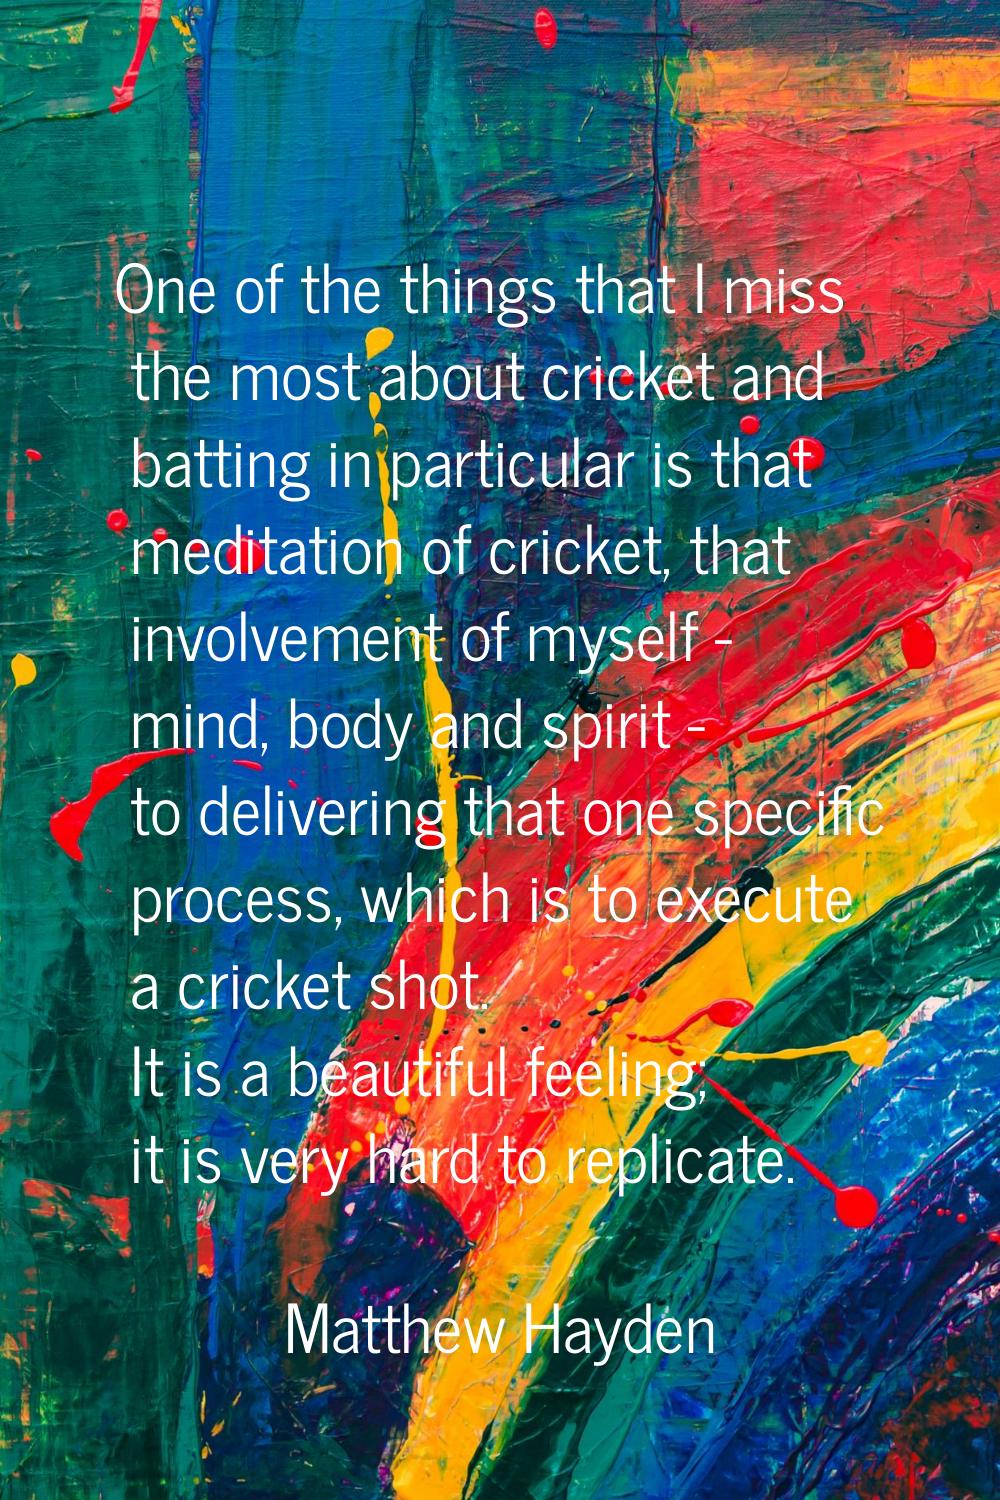 One of the things that I miss the most about cricket and batting in particular is that meditation o